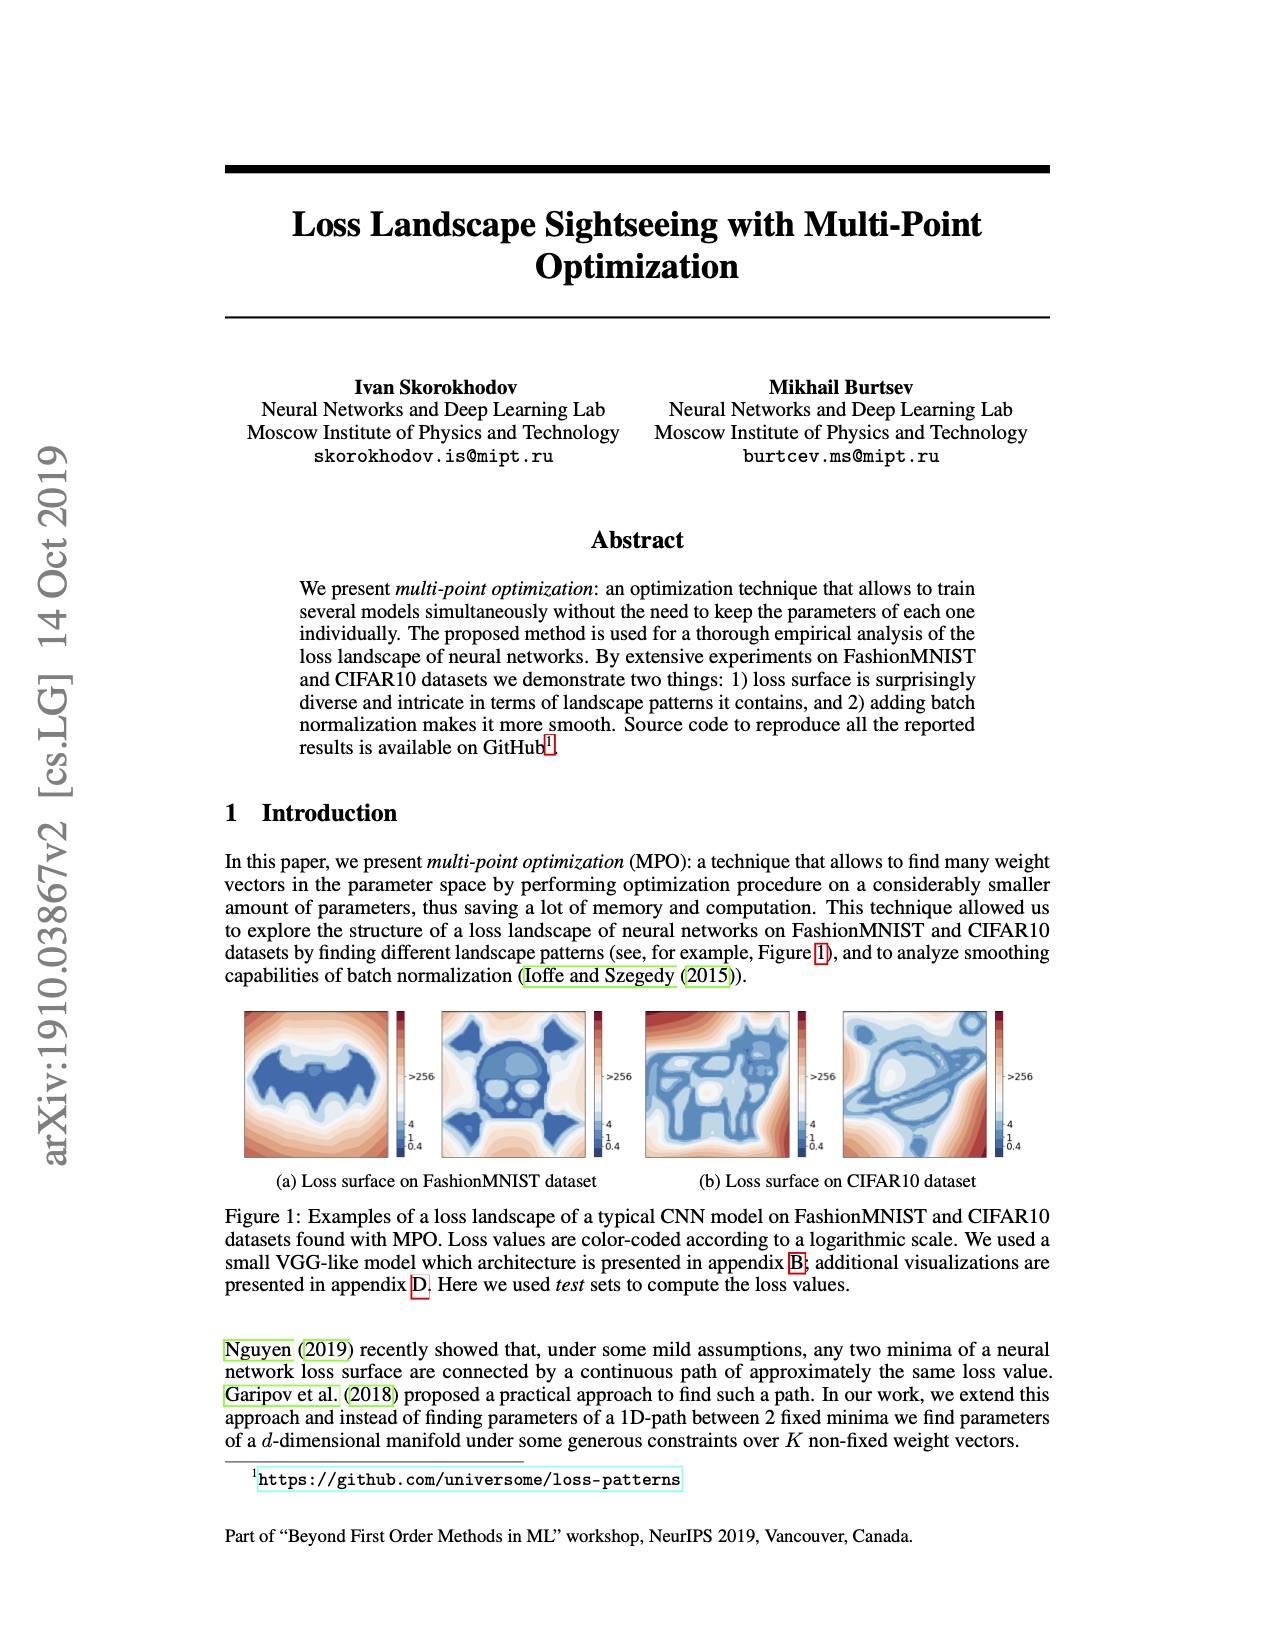 Loss Landscape Sightseeing with Multi-Point Optimization